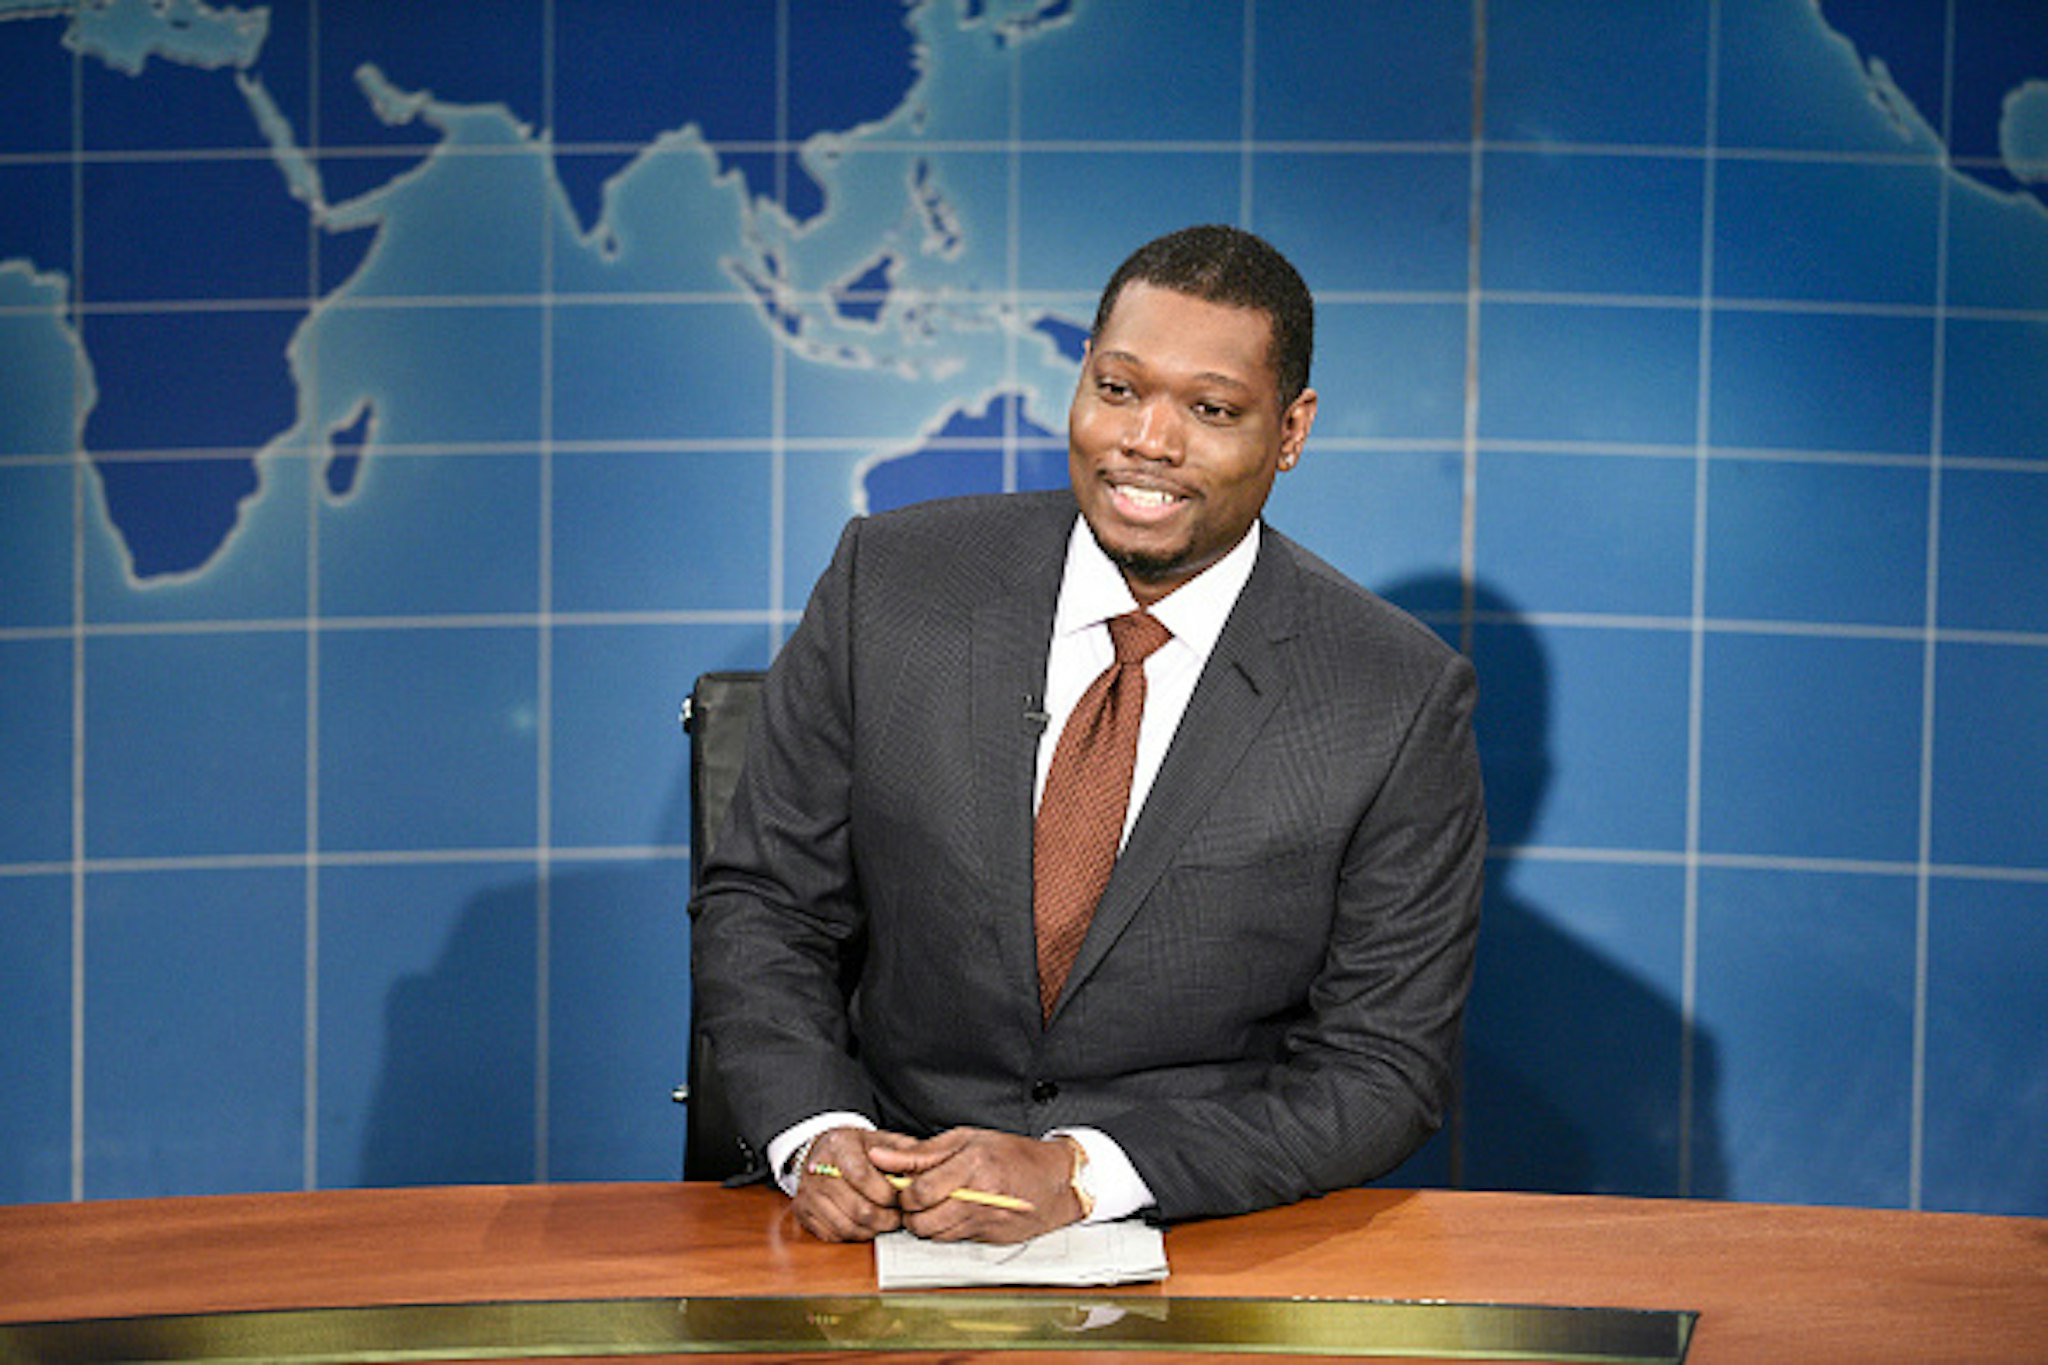 SATURDAY NIGHT LIVE -- "John Mulaney" Episode 1790 -- Pictured: Anchor Michael Che during Weekend Update on Saturday, October 31, 2020